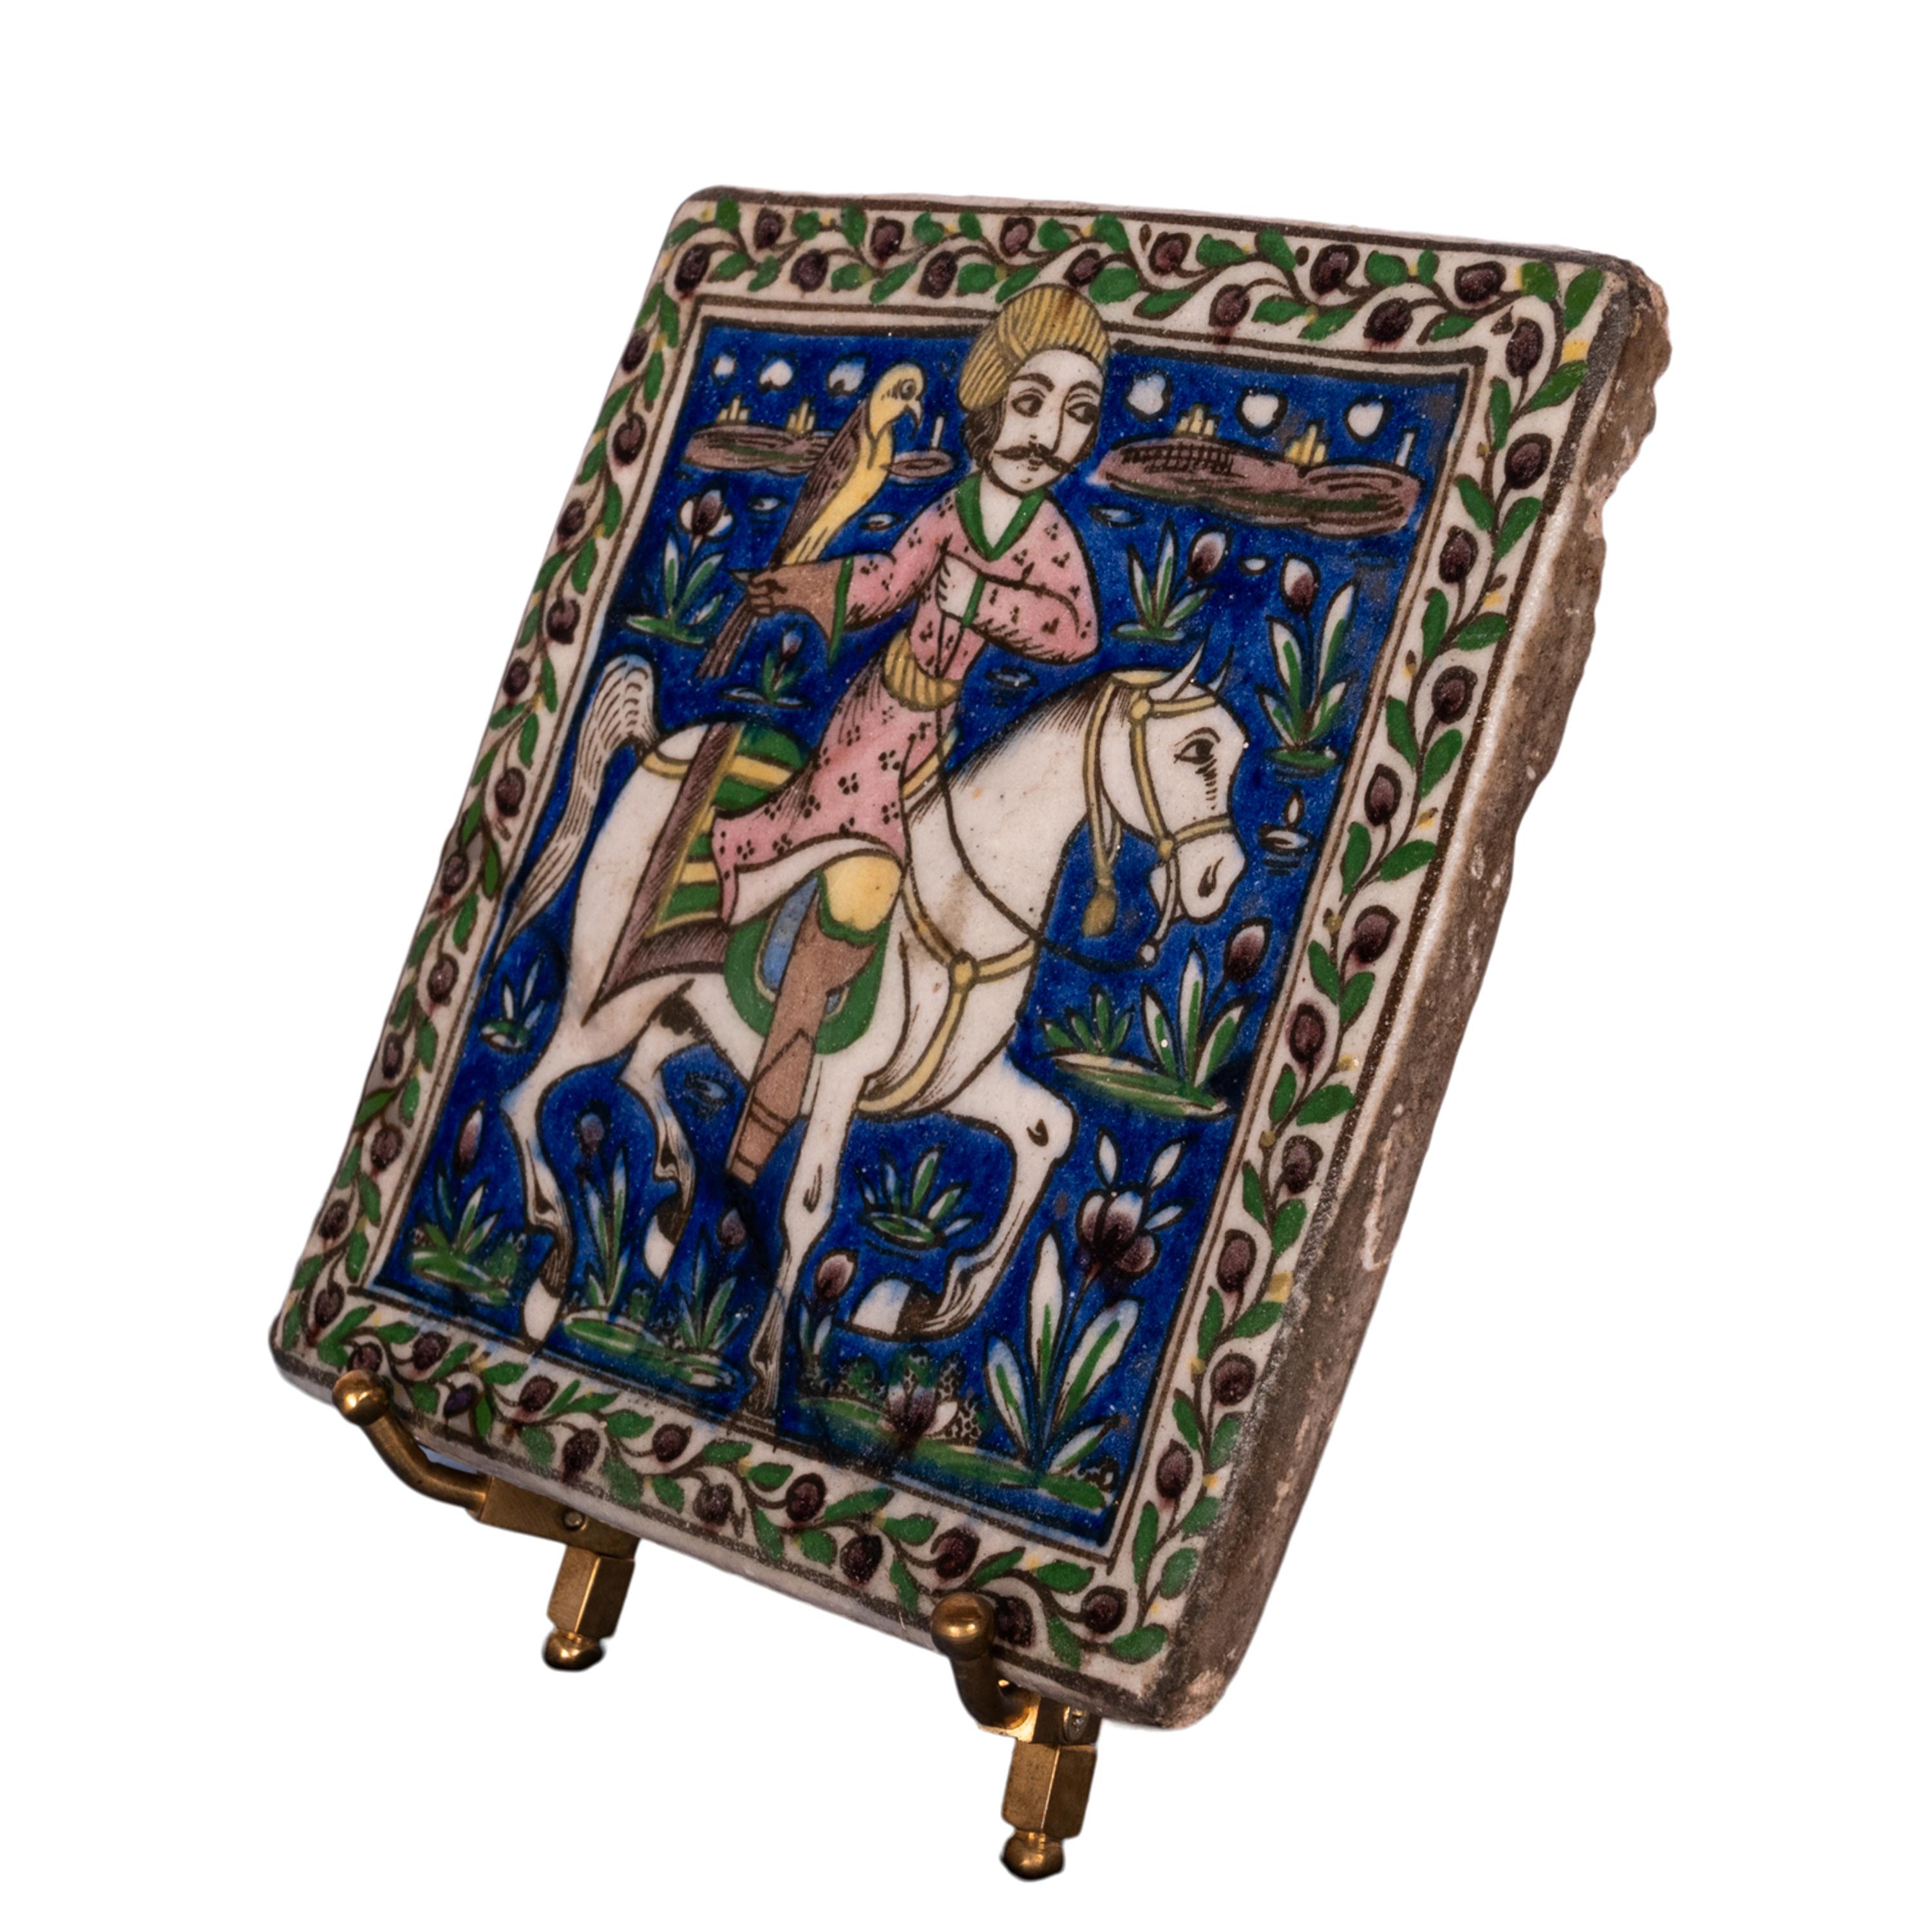 Antique Islamic Persian Painted Relief Tile Falconer Prince Horseback Qajar 1850 In Good Condition For Sale In Portland, OR